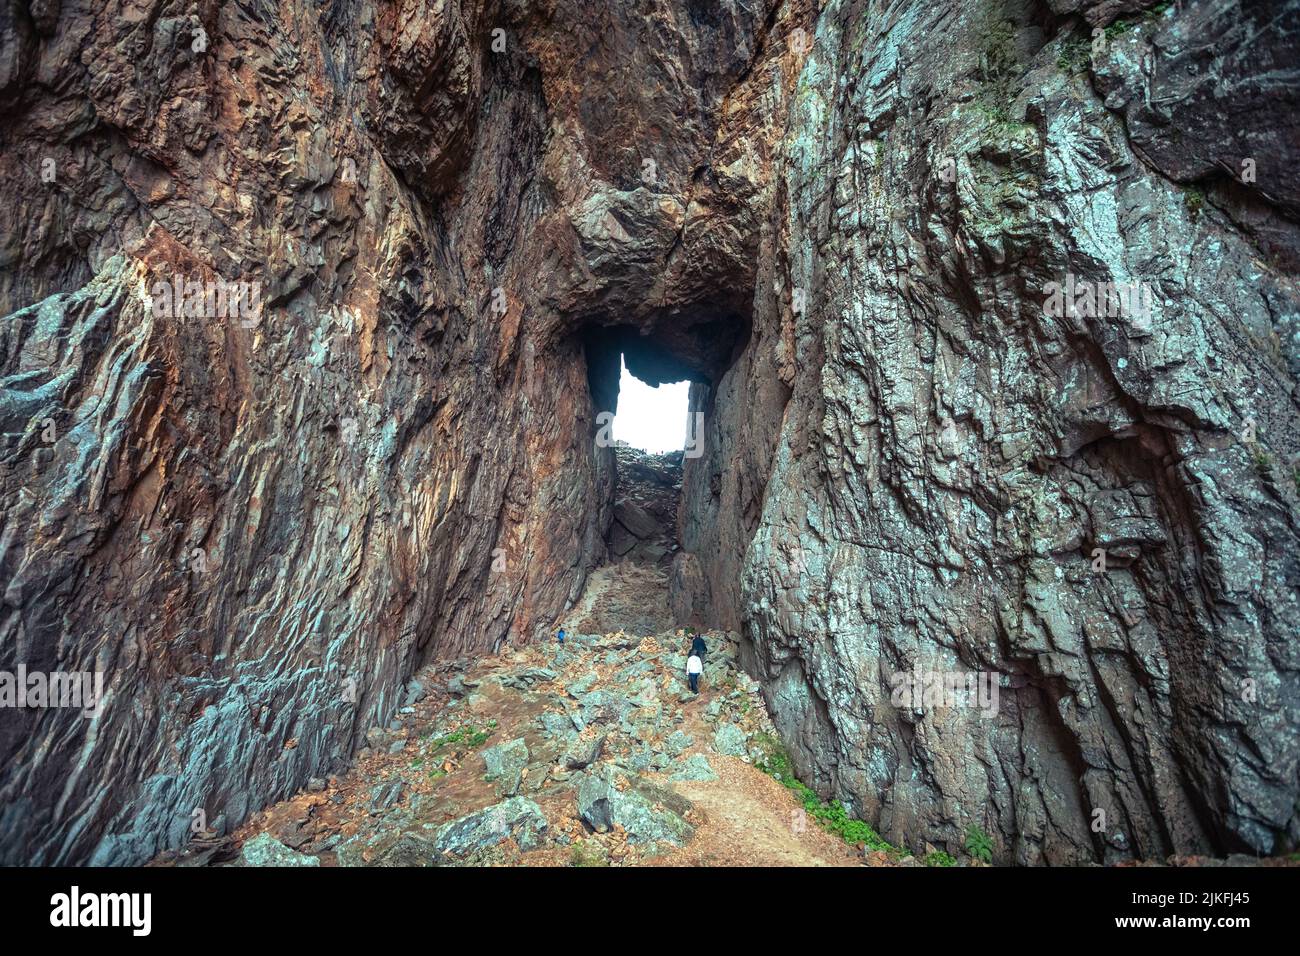 Torghatten cave or hole set into the mountain, Brønnøysund, Norway Stock Photo